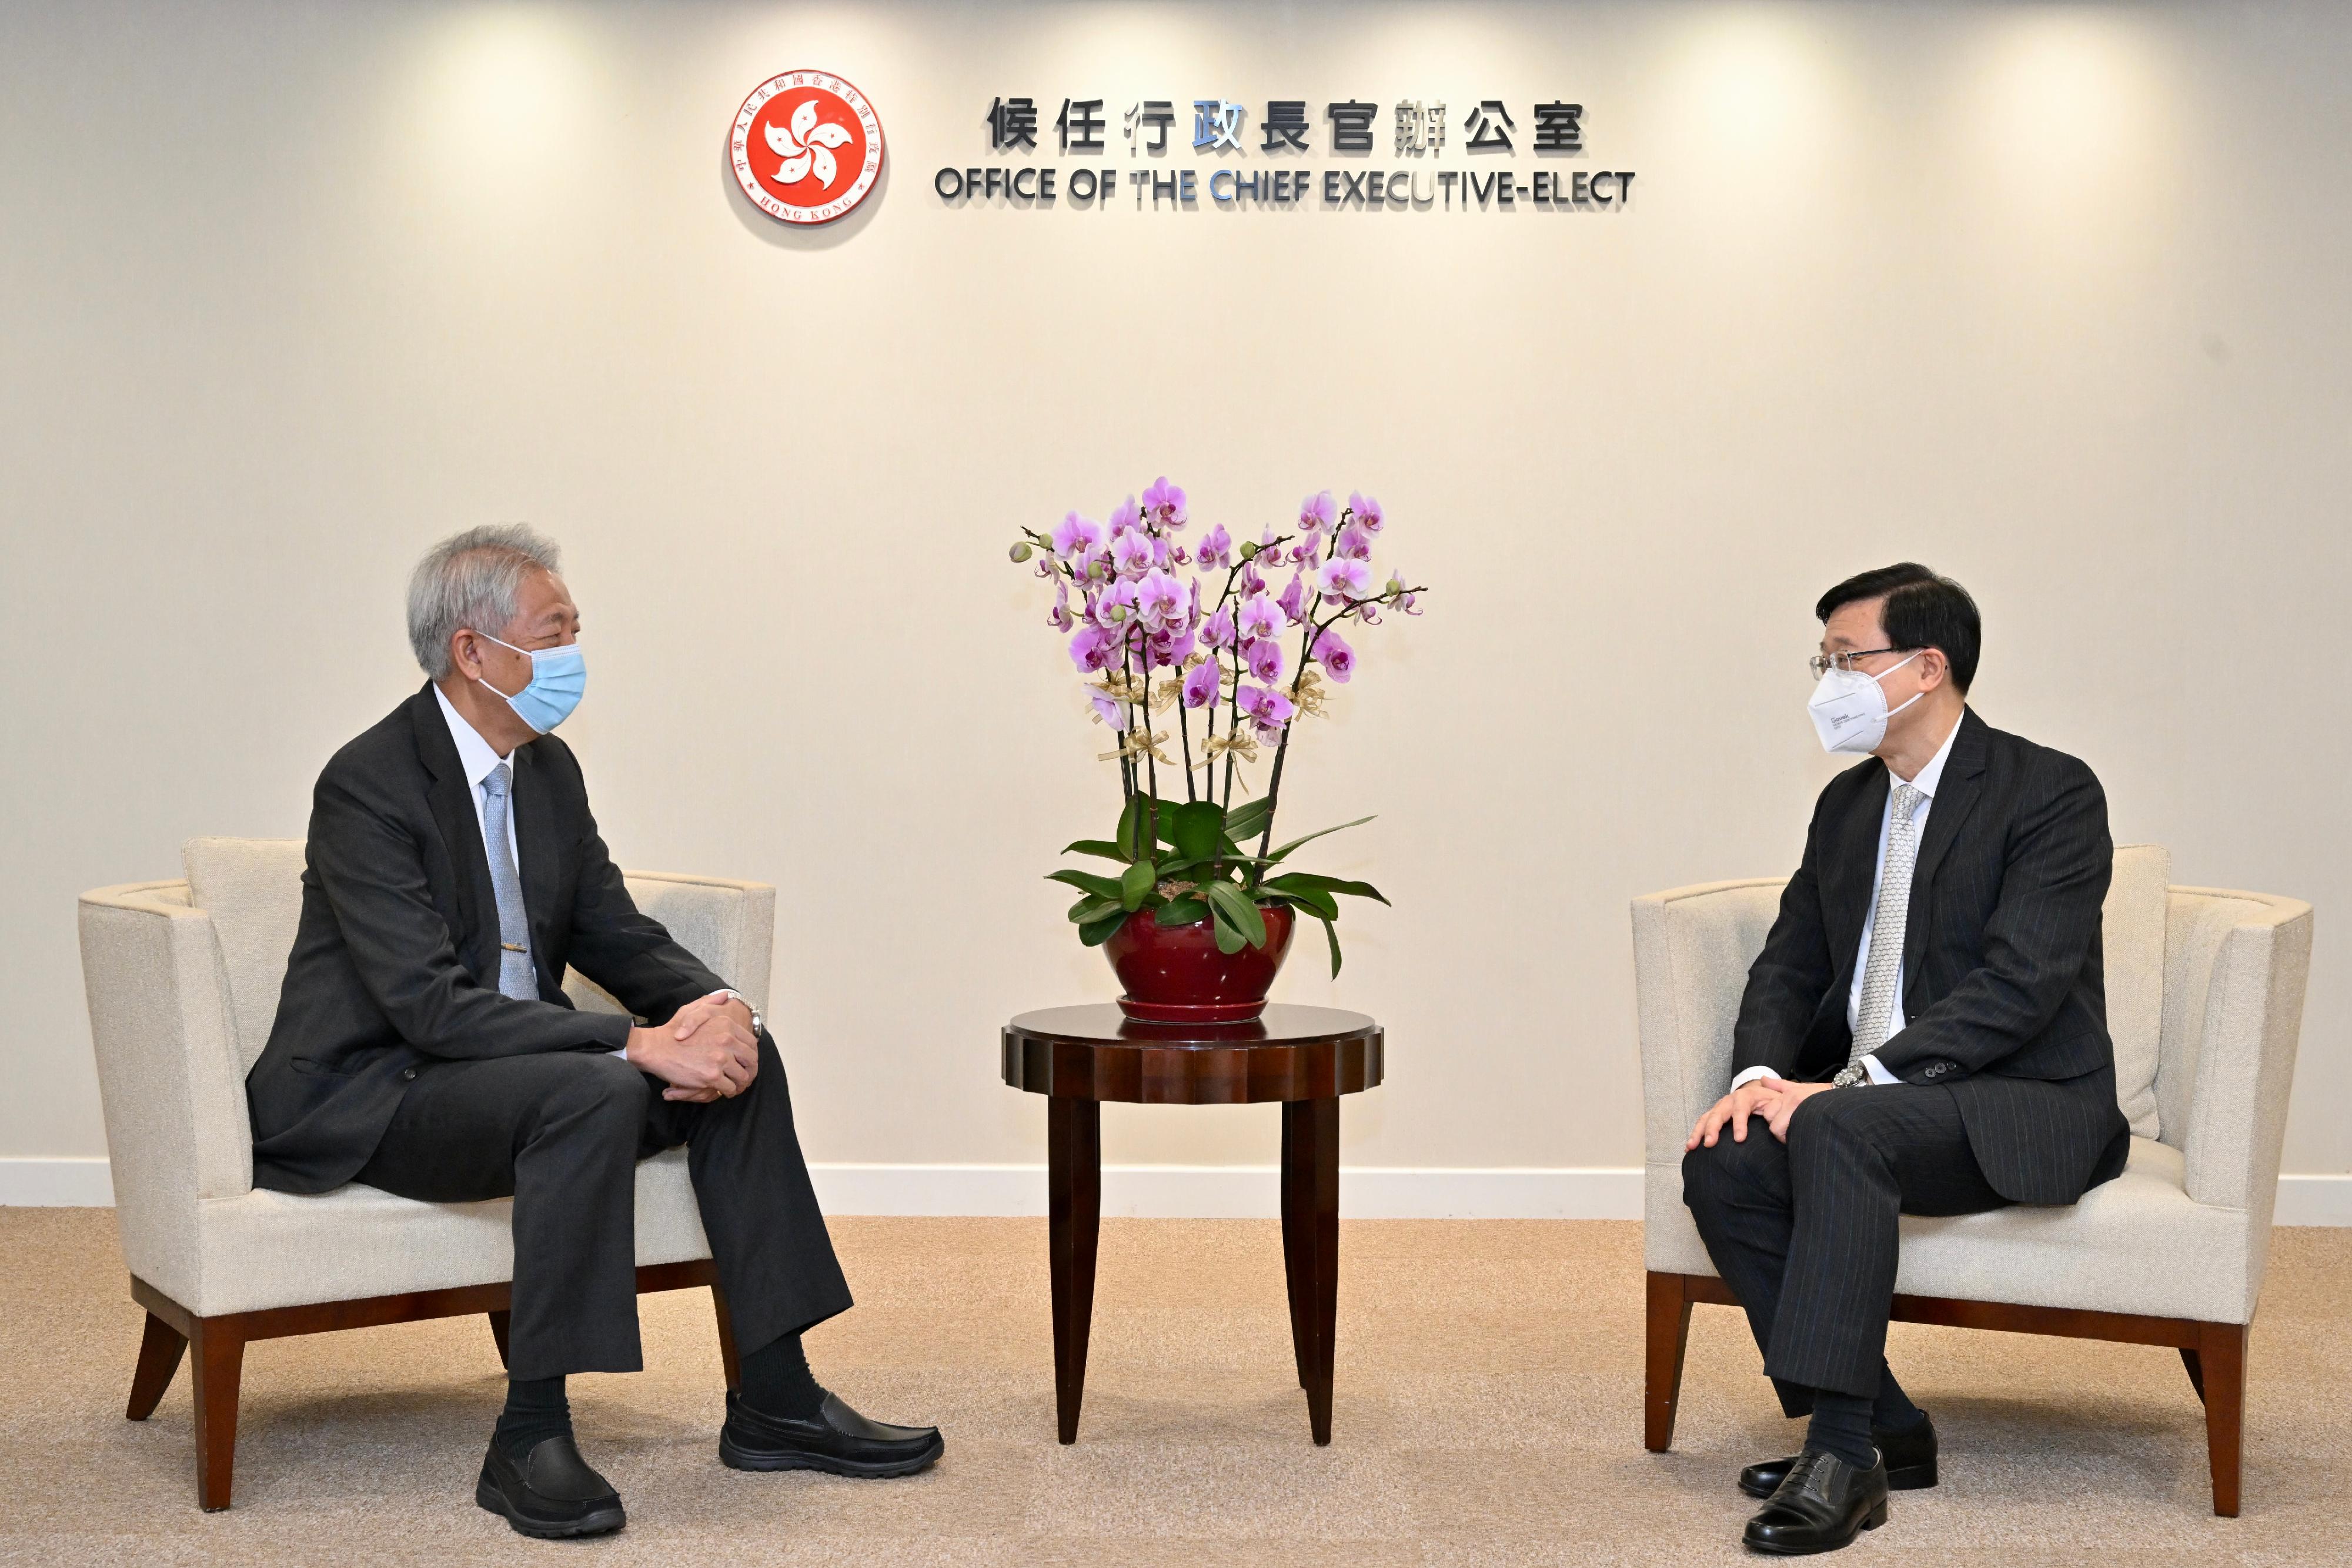 The Chief Executive-elect, Mr John Lee (right), meets with the Senior Minister and Coordinating Minister for National Security of Singapore, Mr Teo Chee Hean (left), today (June 1).